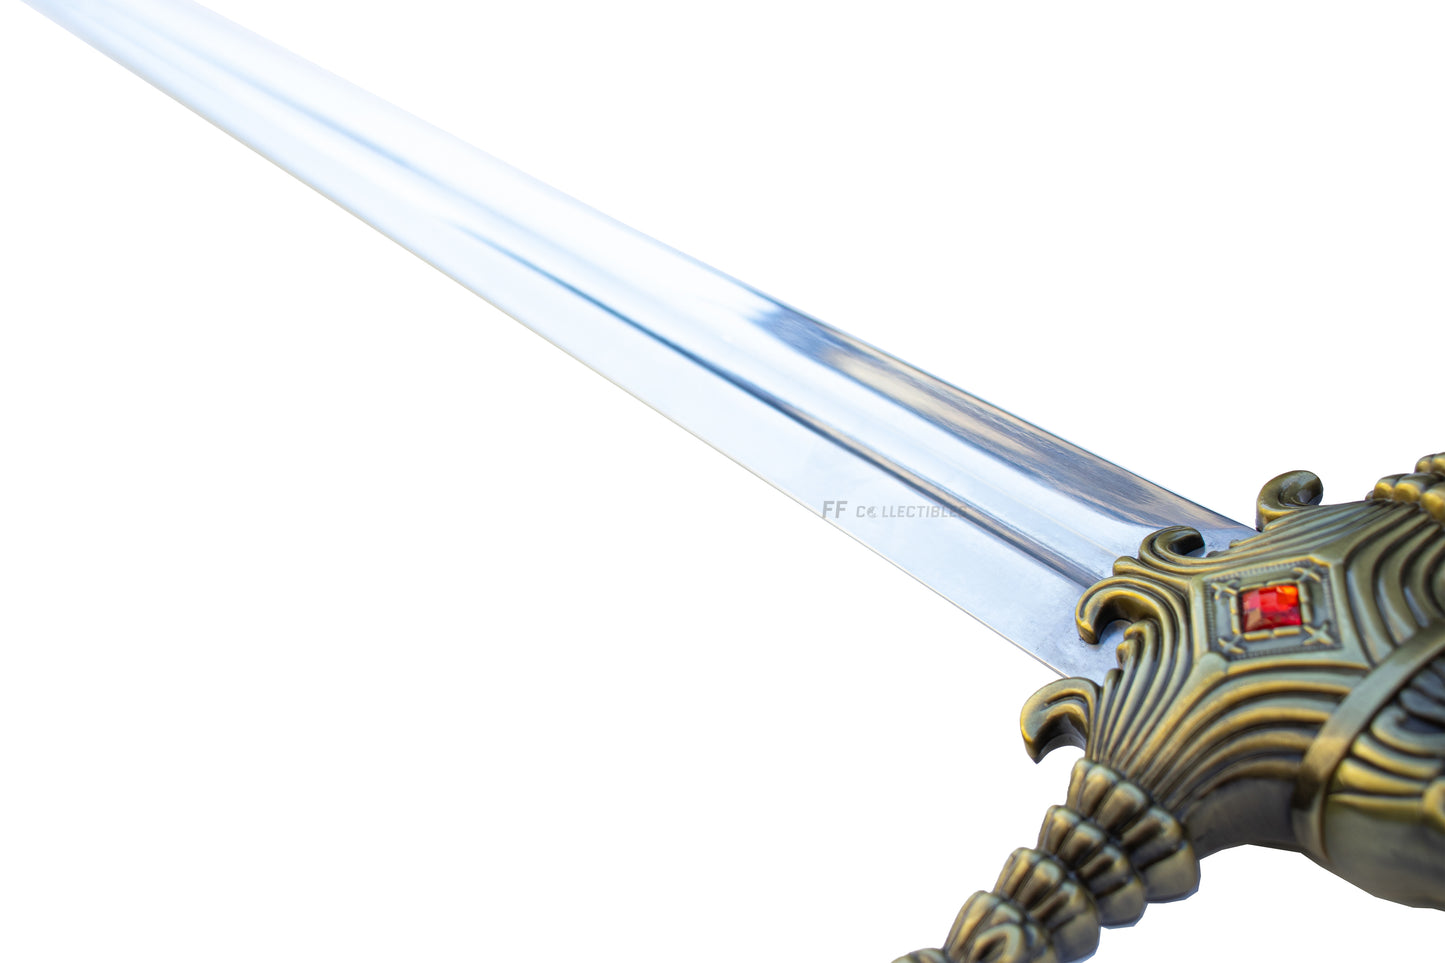 GAME OF THRONES - OATHKEEPER, BRIENNE OF TARTH'S SWORD (with FREE wall plaque)